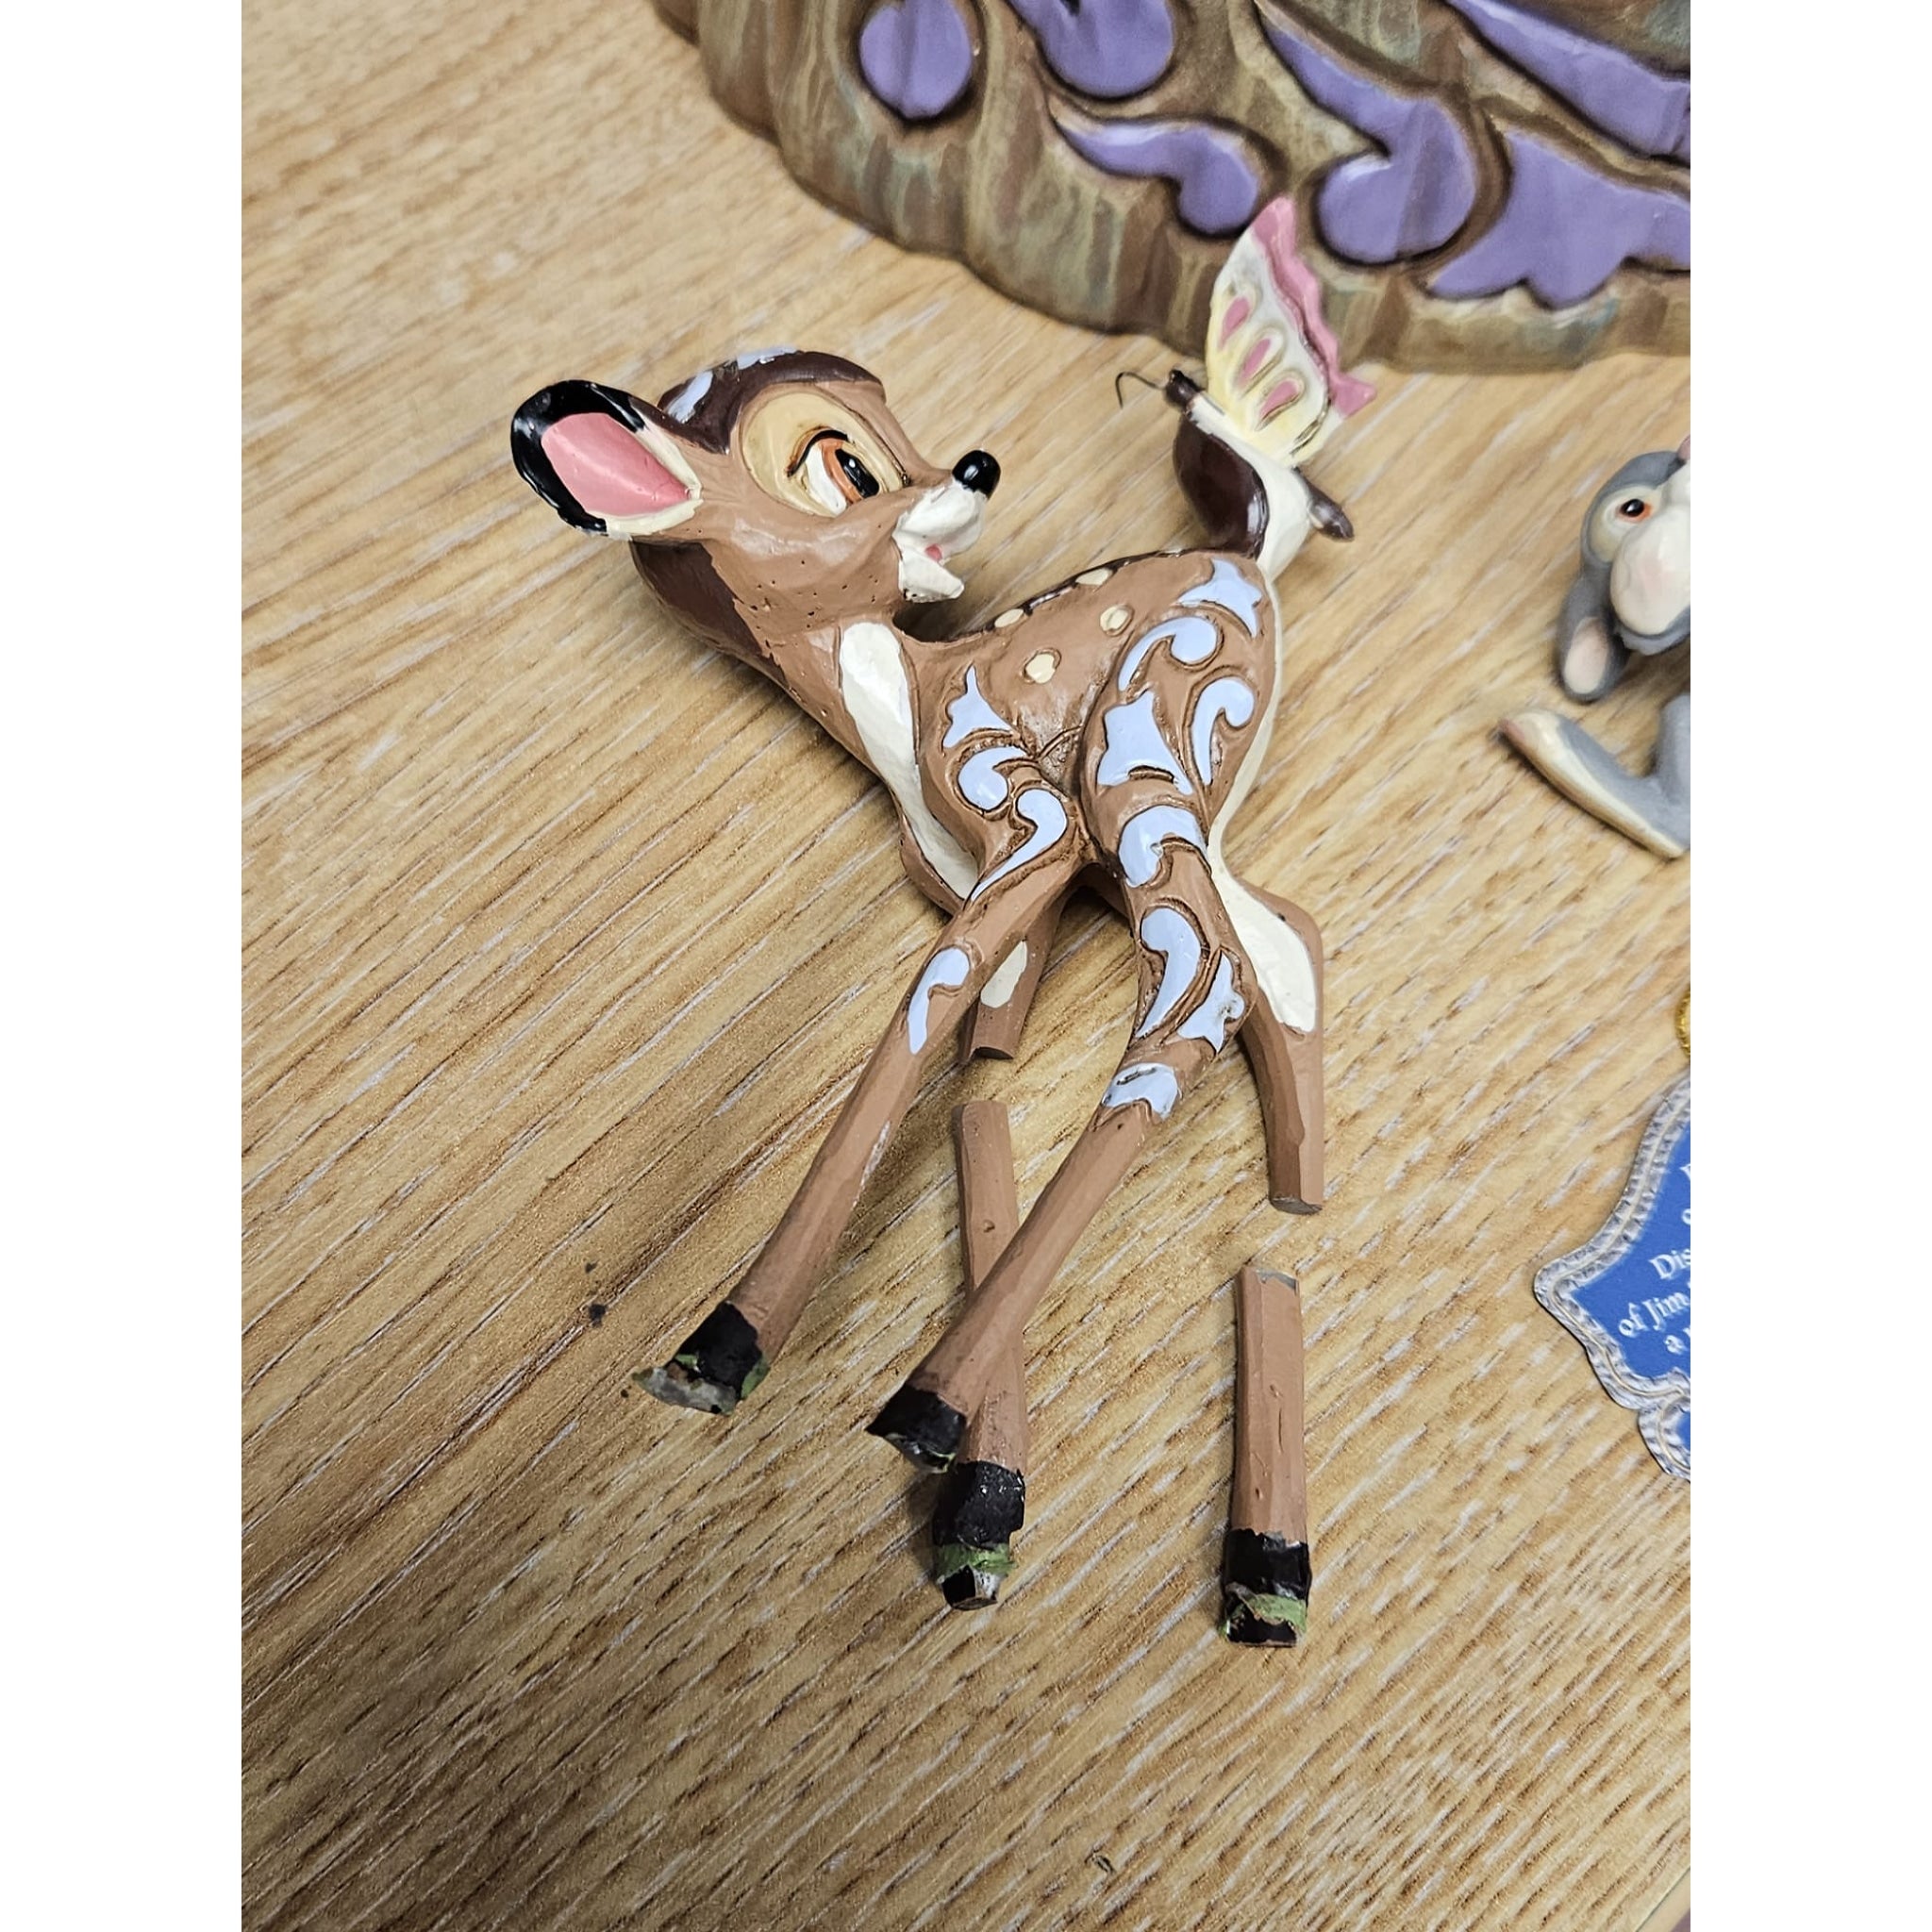 Disney Traditions Forest Friends Bambi 6010086 Figurine by Jim Shore DAMAGED 2